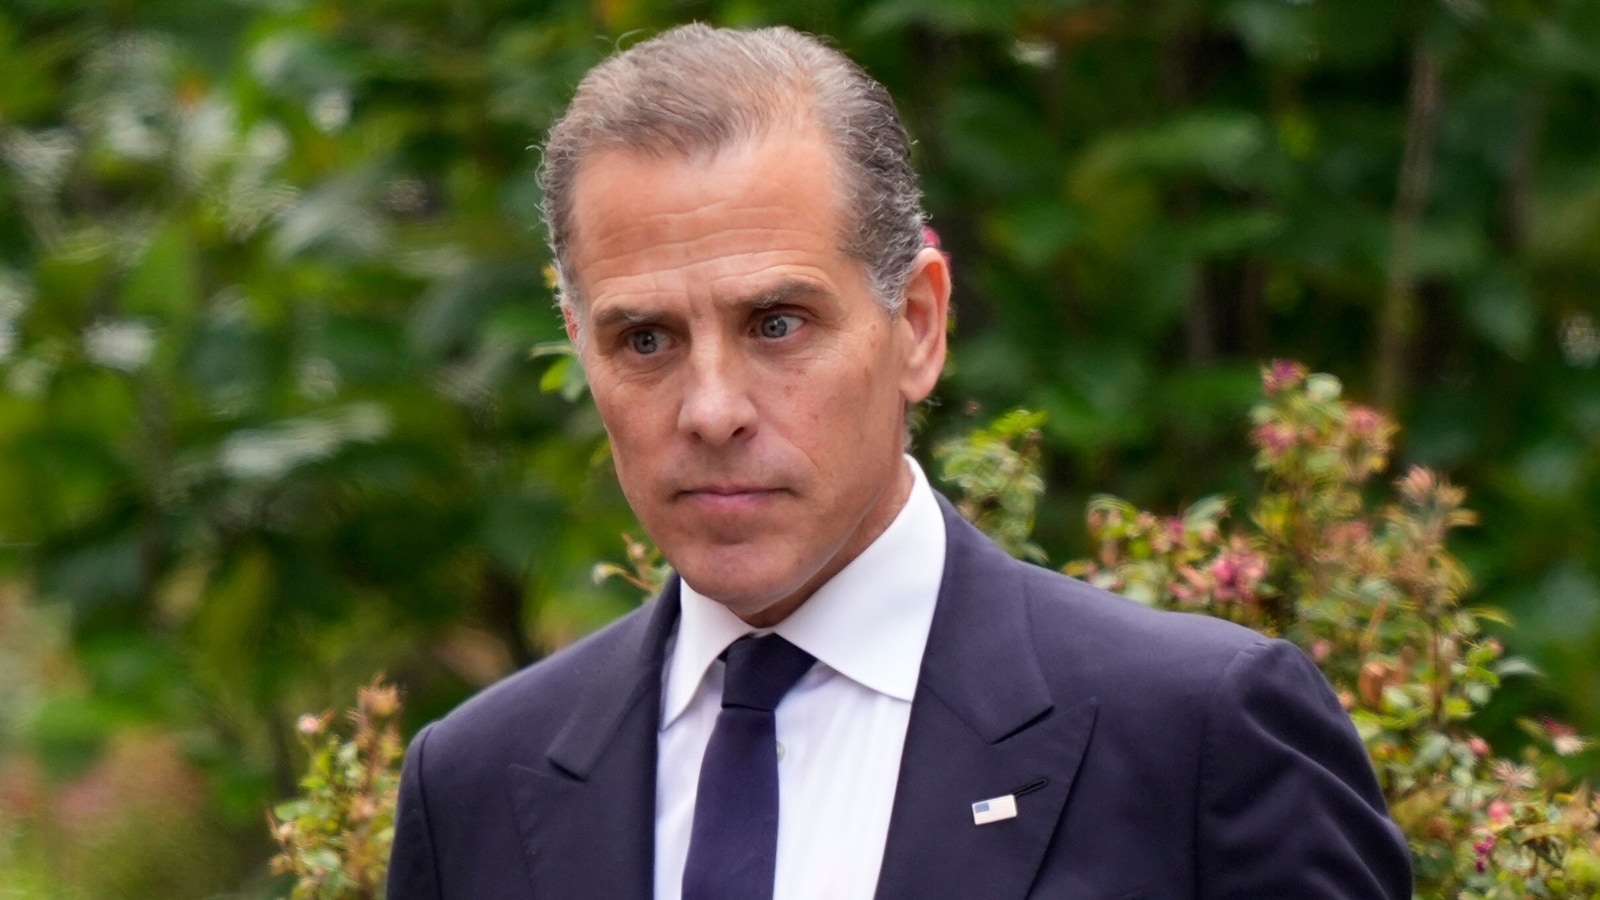 Hunter Biden found guilty on all felony charges in historic federal gun trial